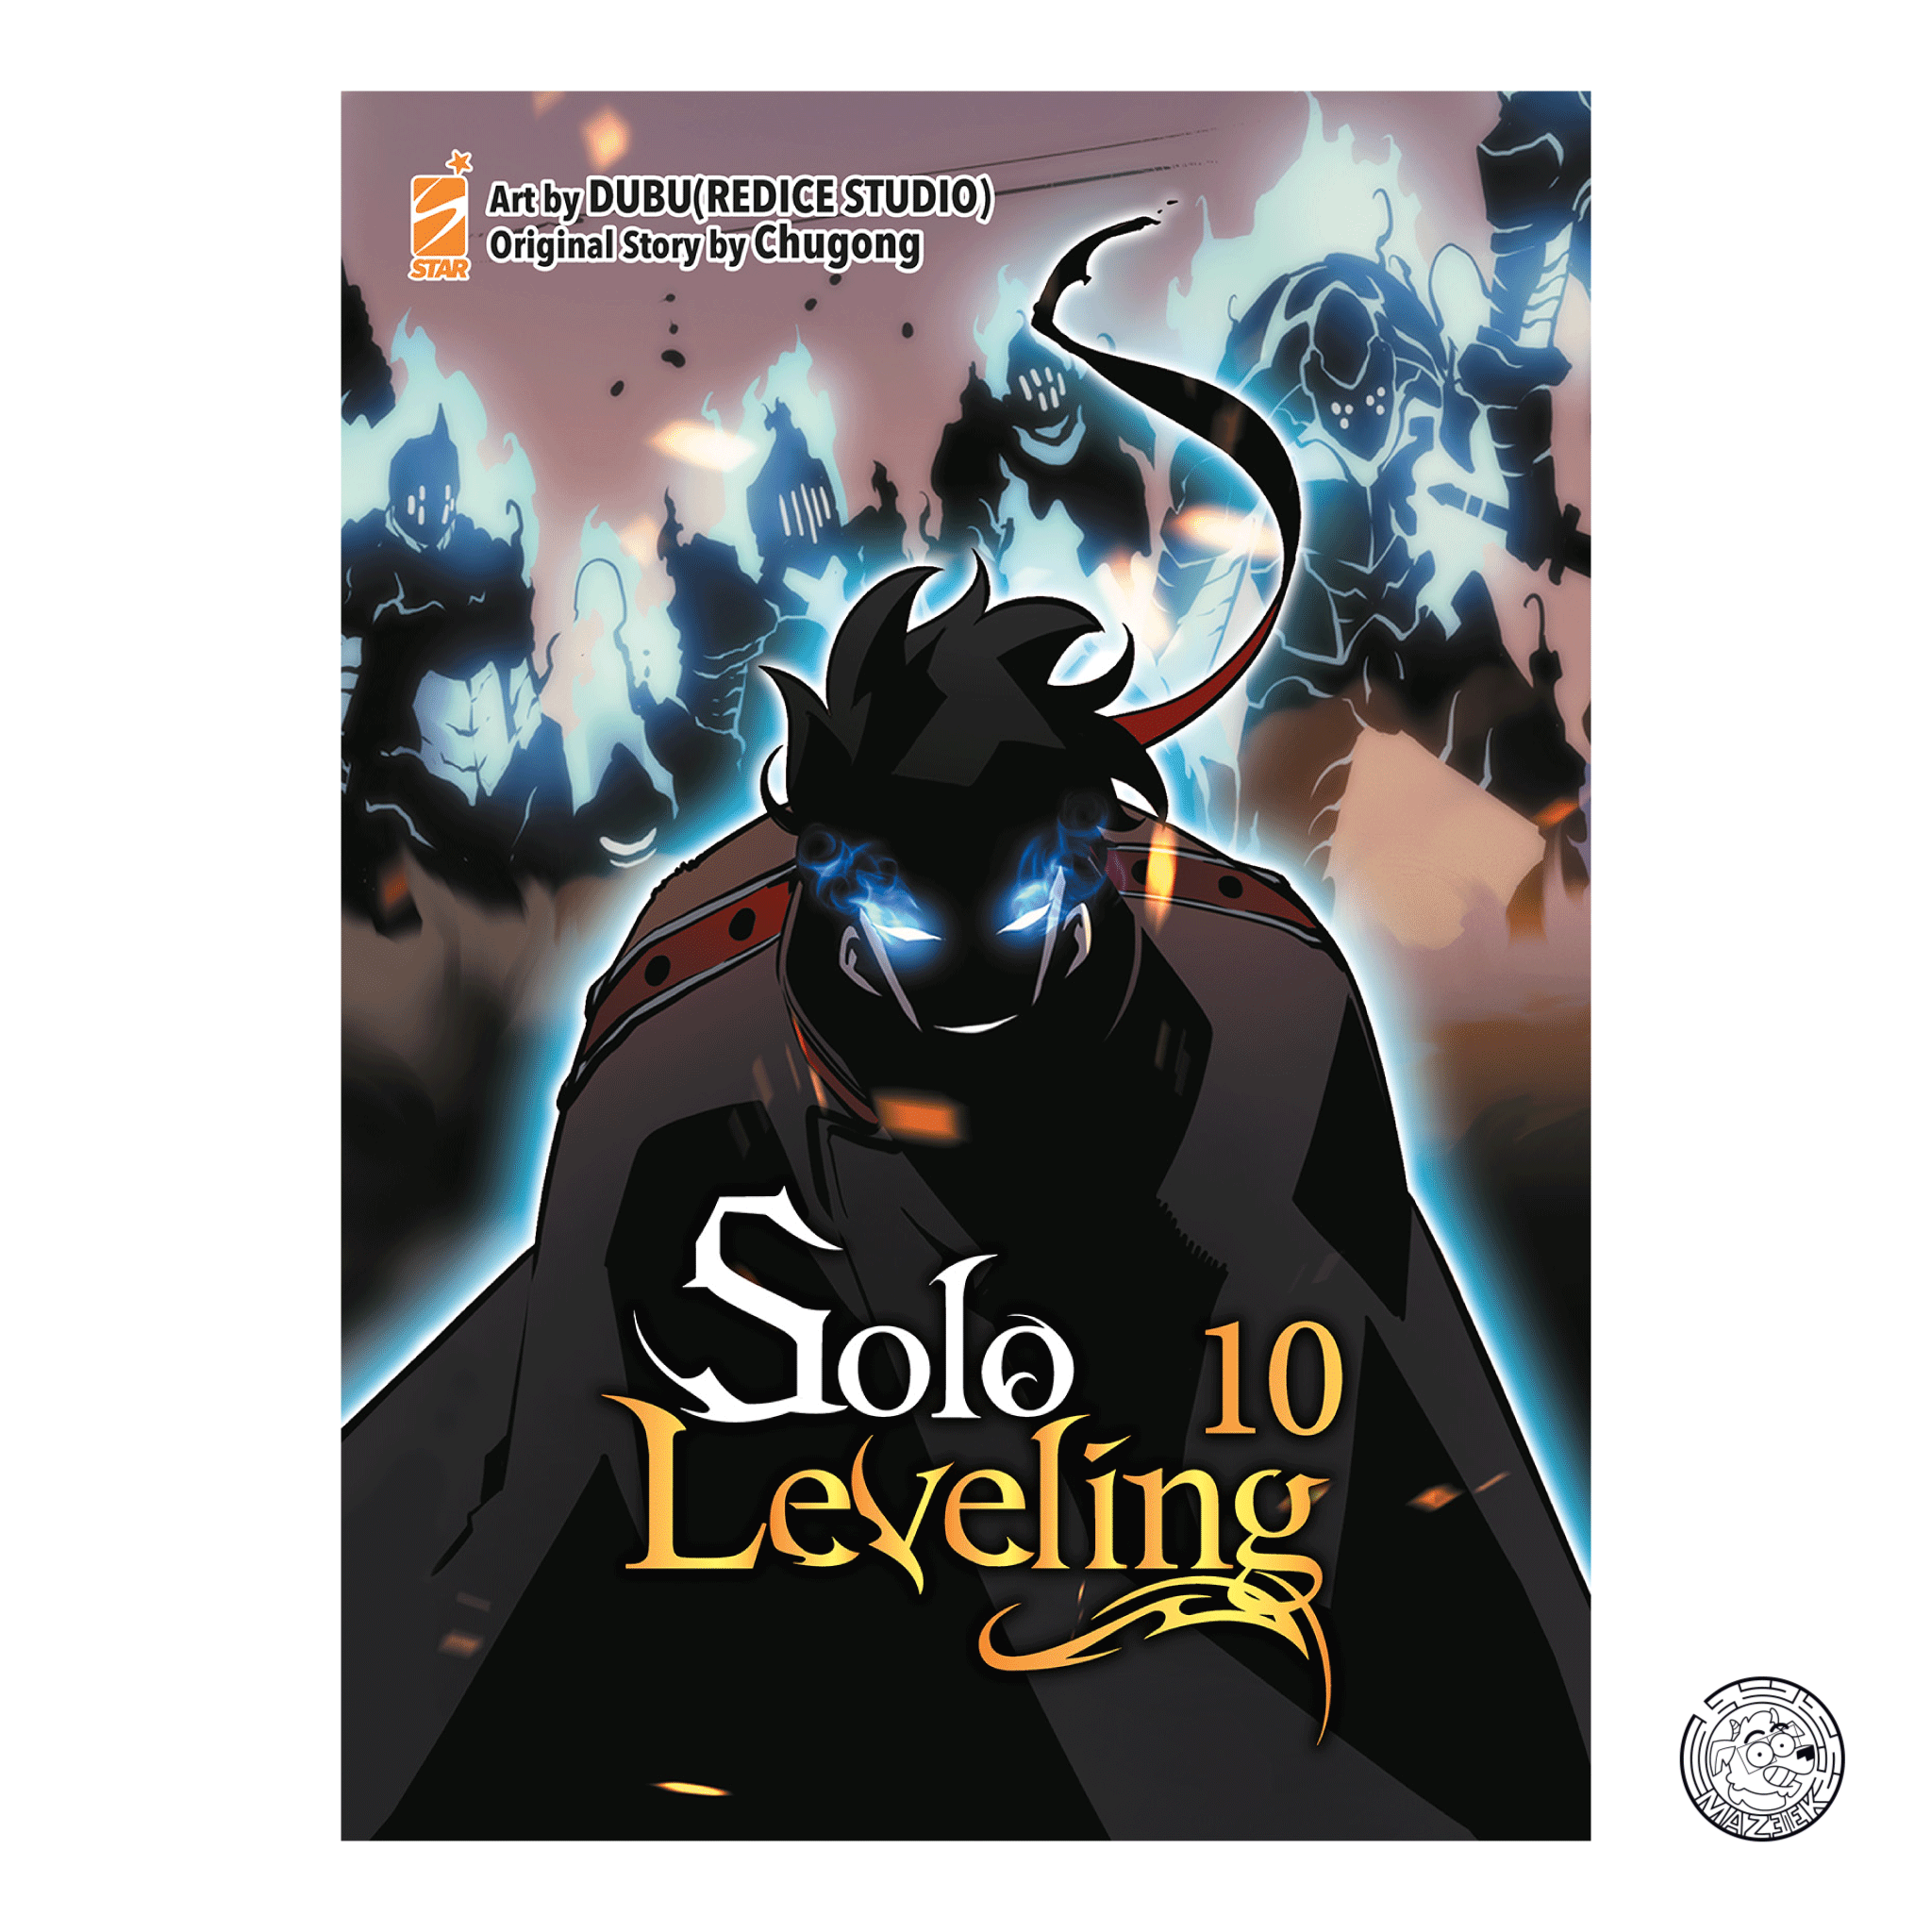 Solo Leveling 10